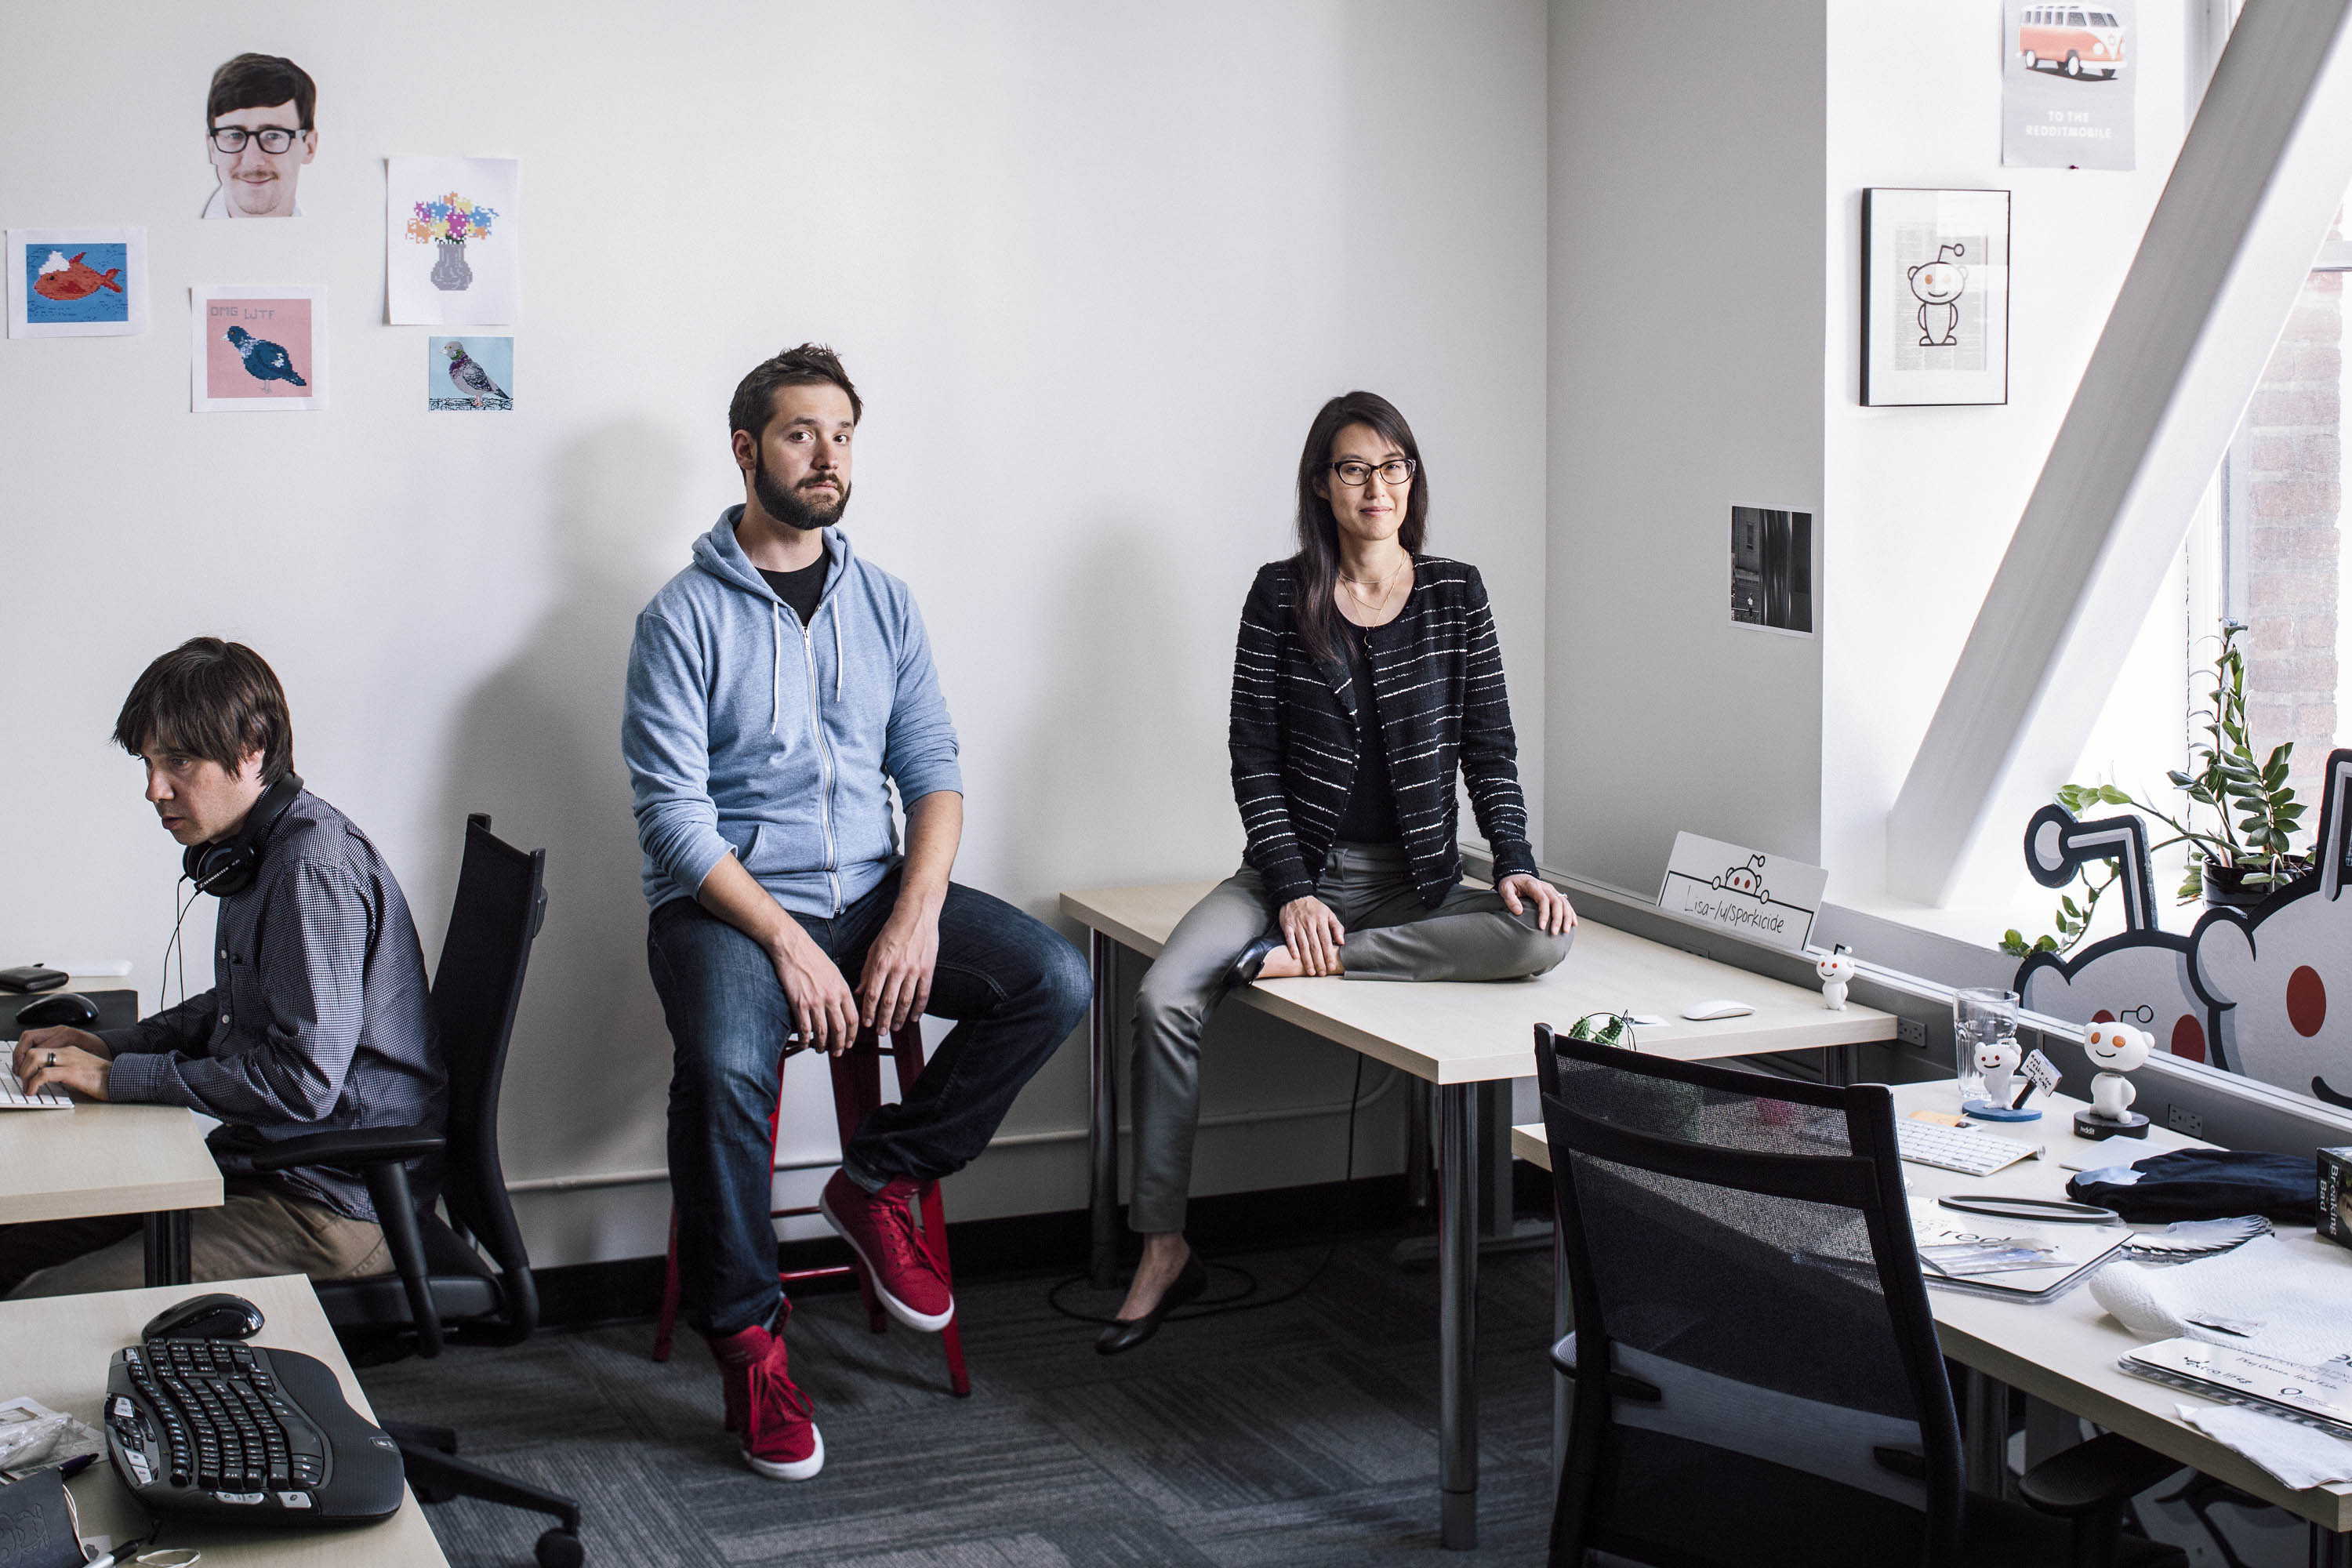 Reddit co-founder and executive chairman Alexis Ohanian and interim CEO Ellen Pao in the company’s San Francisco headquarters. (Mark Mahaney for TIME)